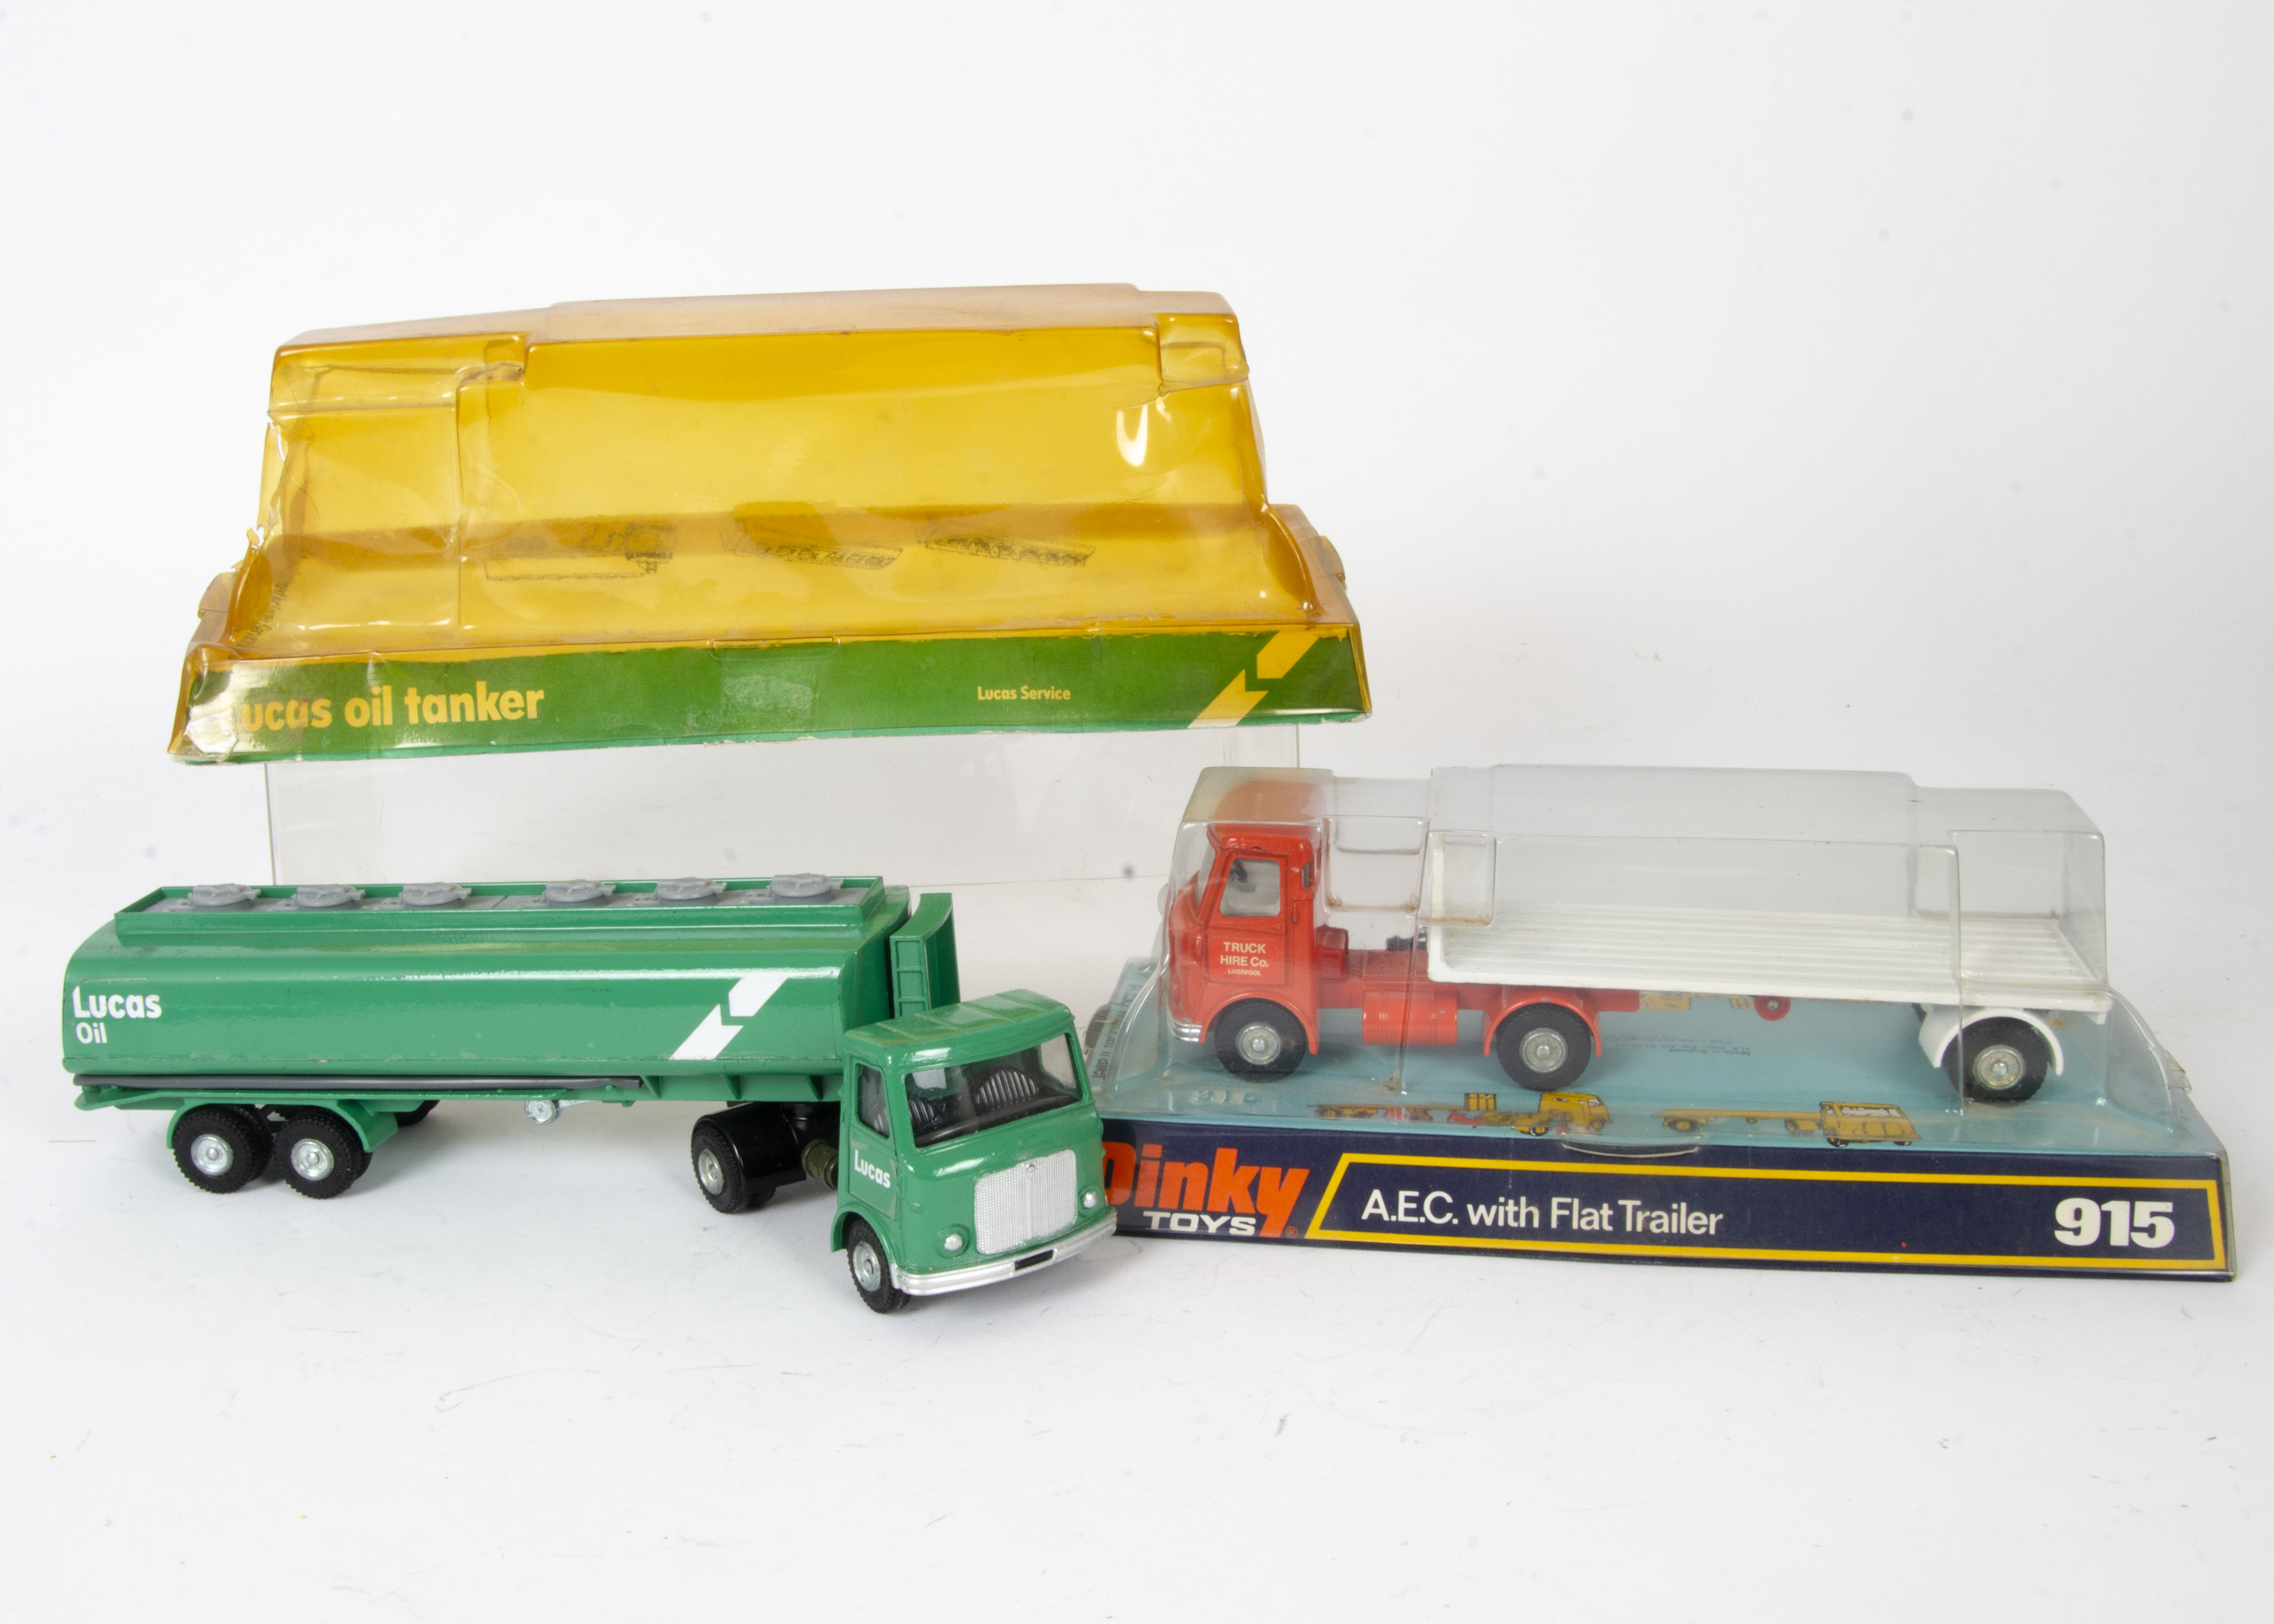 Dinky Toys 945 A.E.C ~Lucas Oil~ Tanker, promotional model, green cab and tank, bare metal hubs, 915